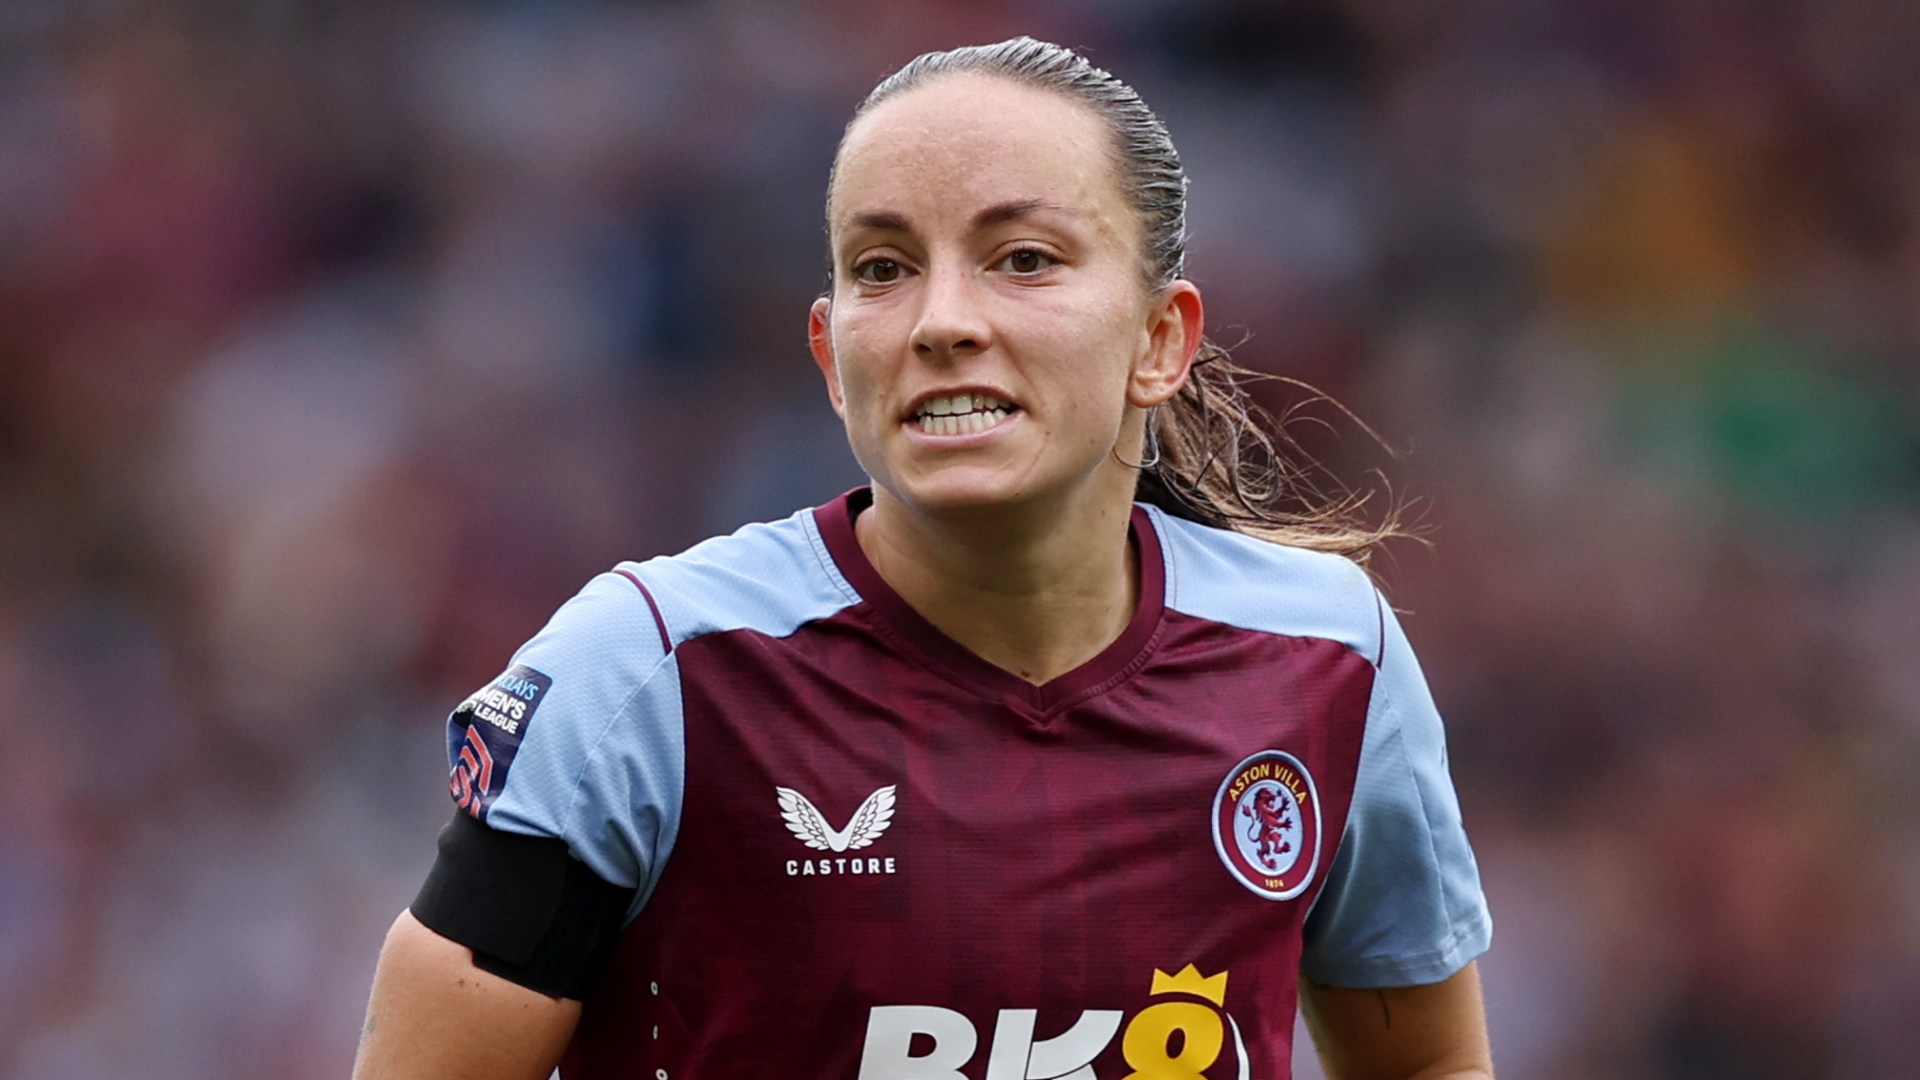 ‘It’s being dealt with’ – End to wet-look shirt saga in sight for Aston Villa after women’s team opt to wear controversial home jersey in WSL season opener against Manchester United